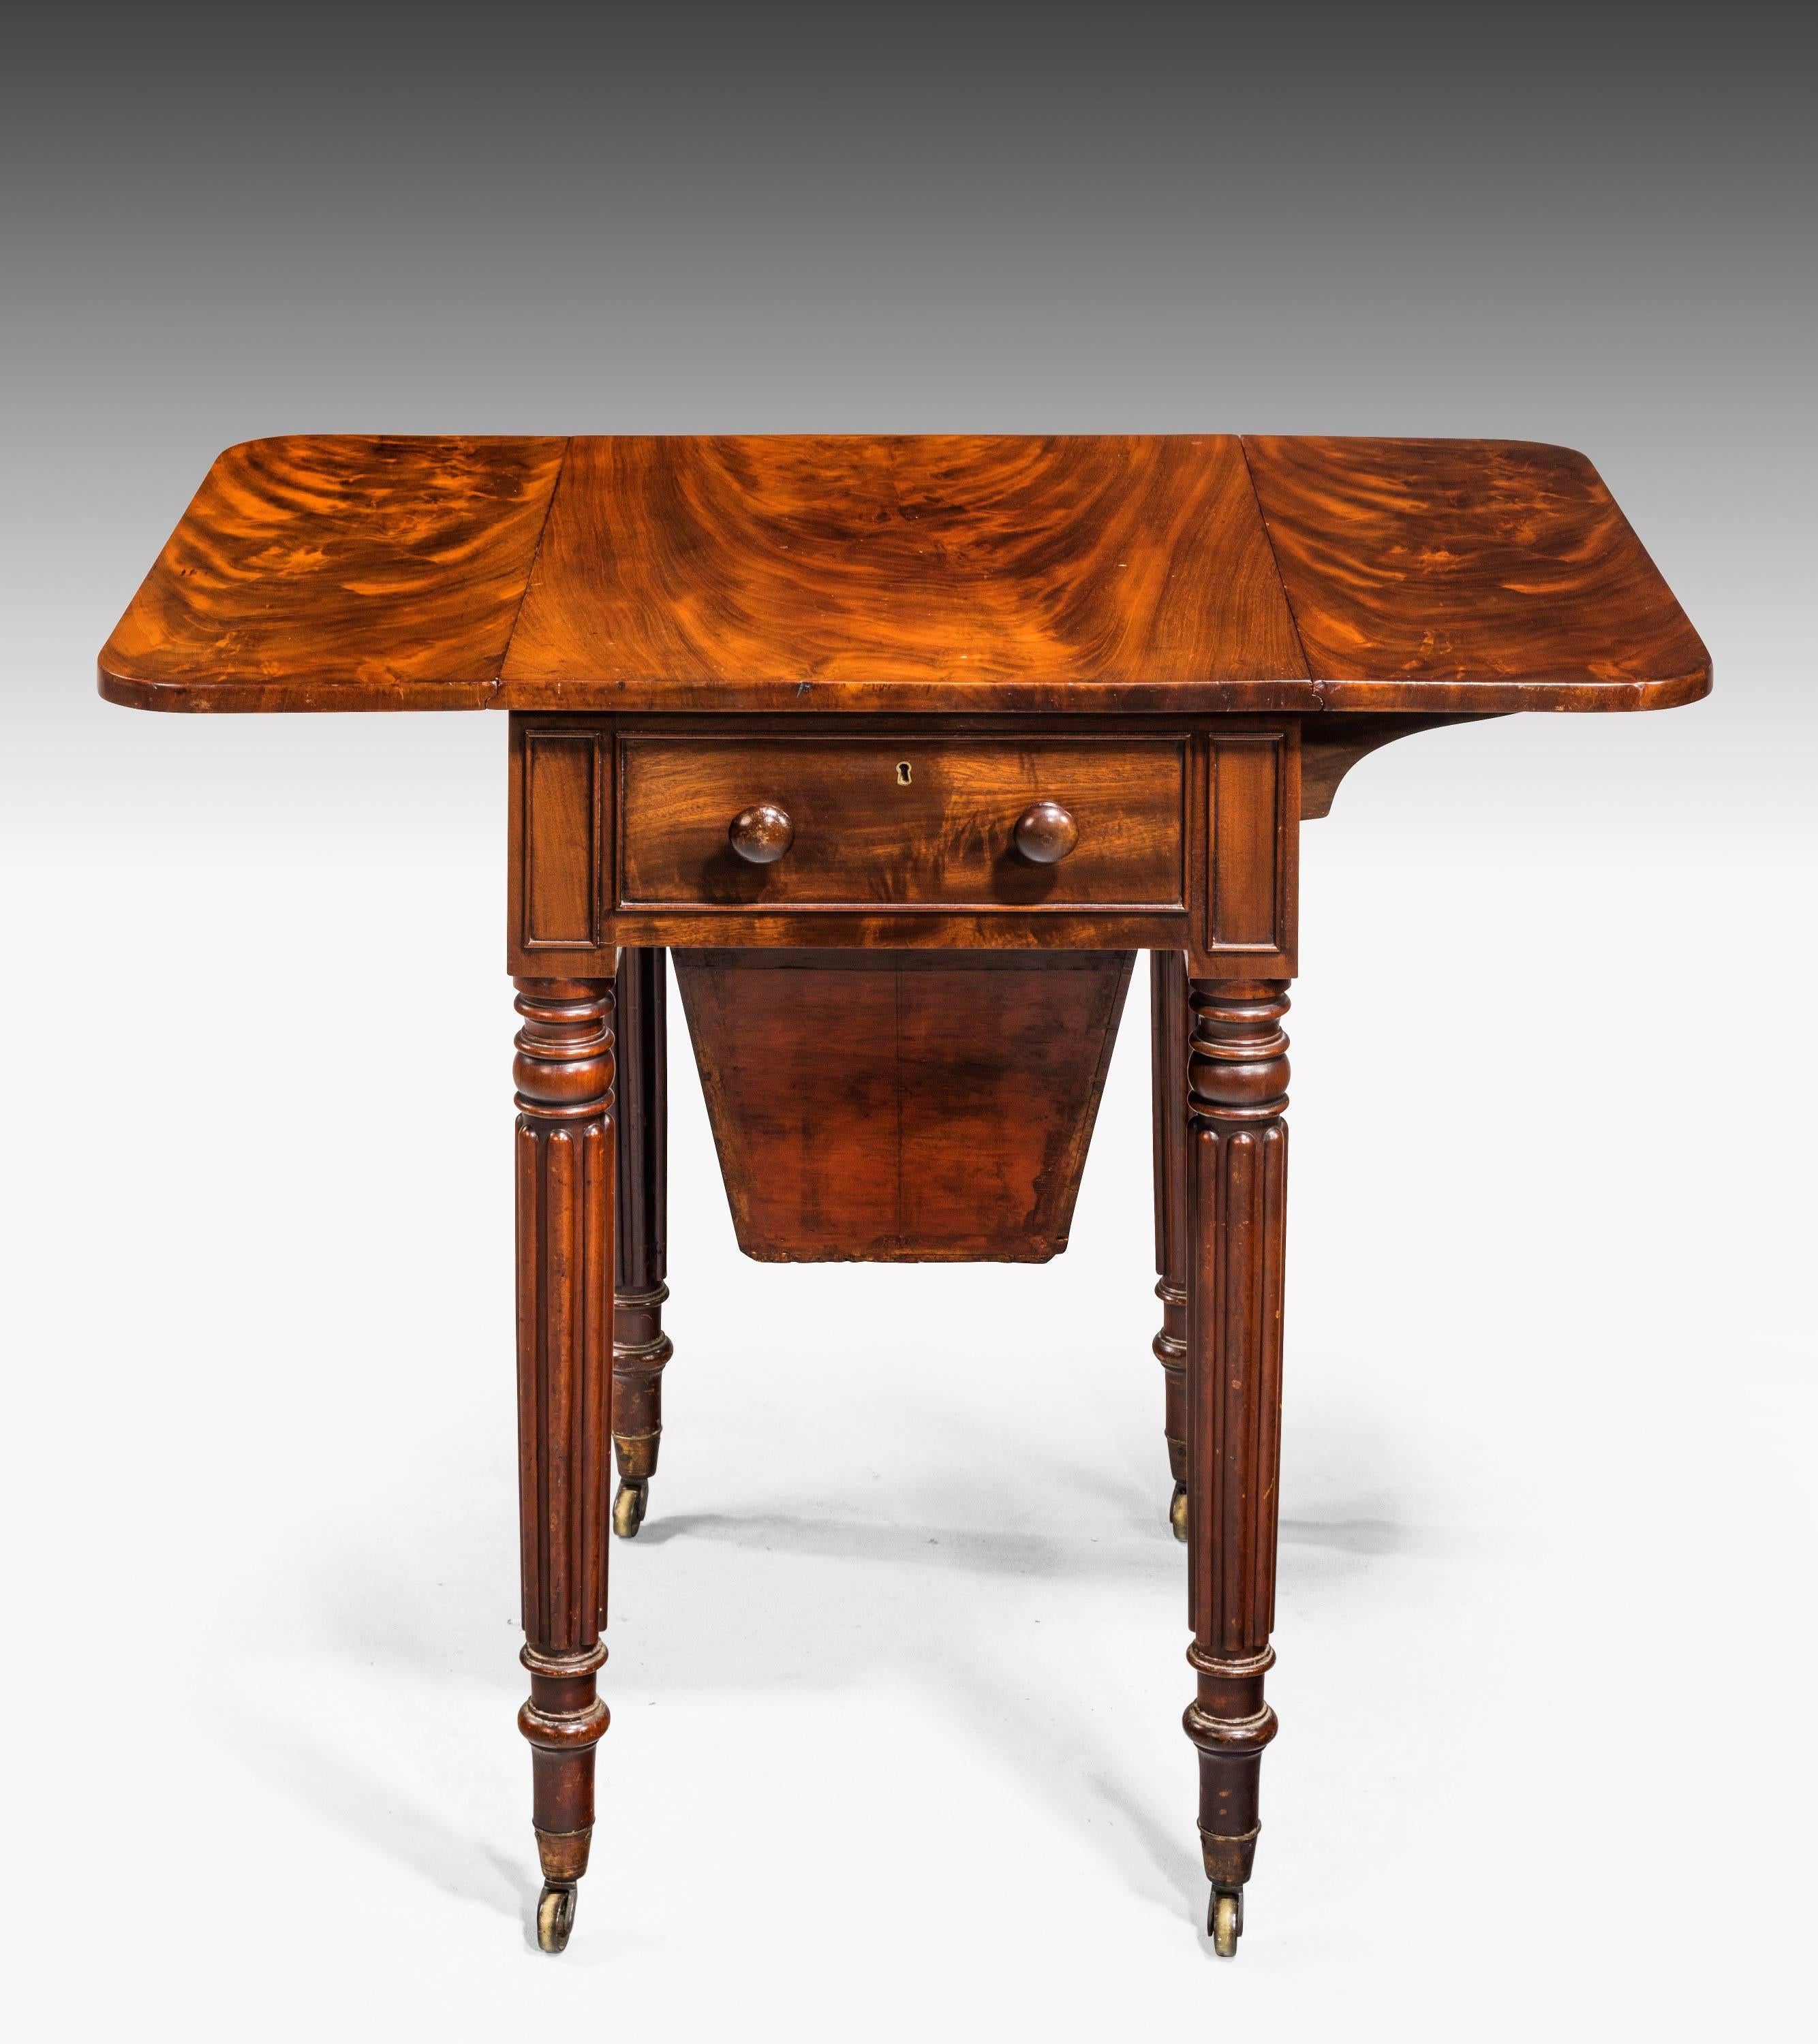 19th Century Regency Period Mahogany Pembroke Work Table with a Sewing Basket